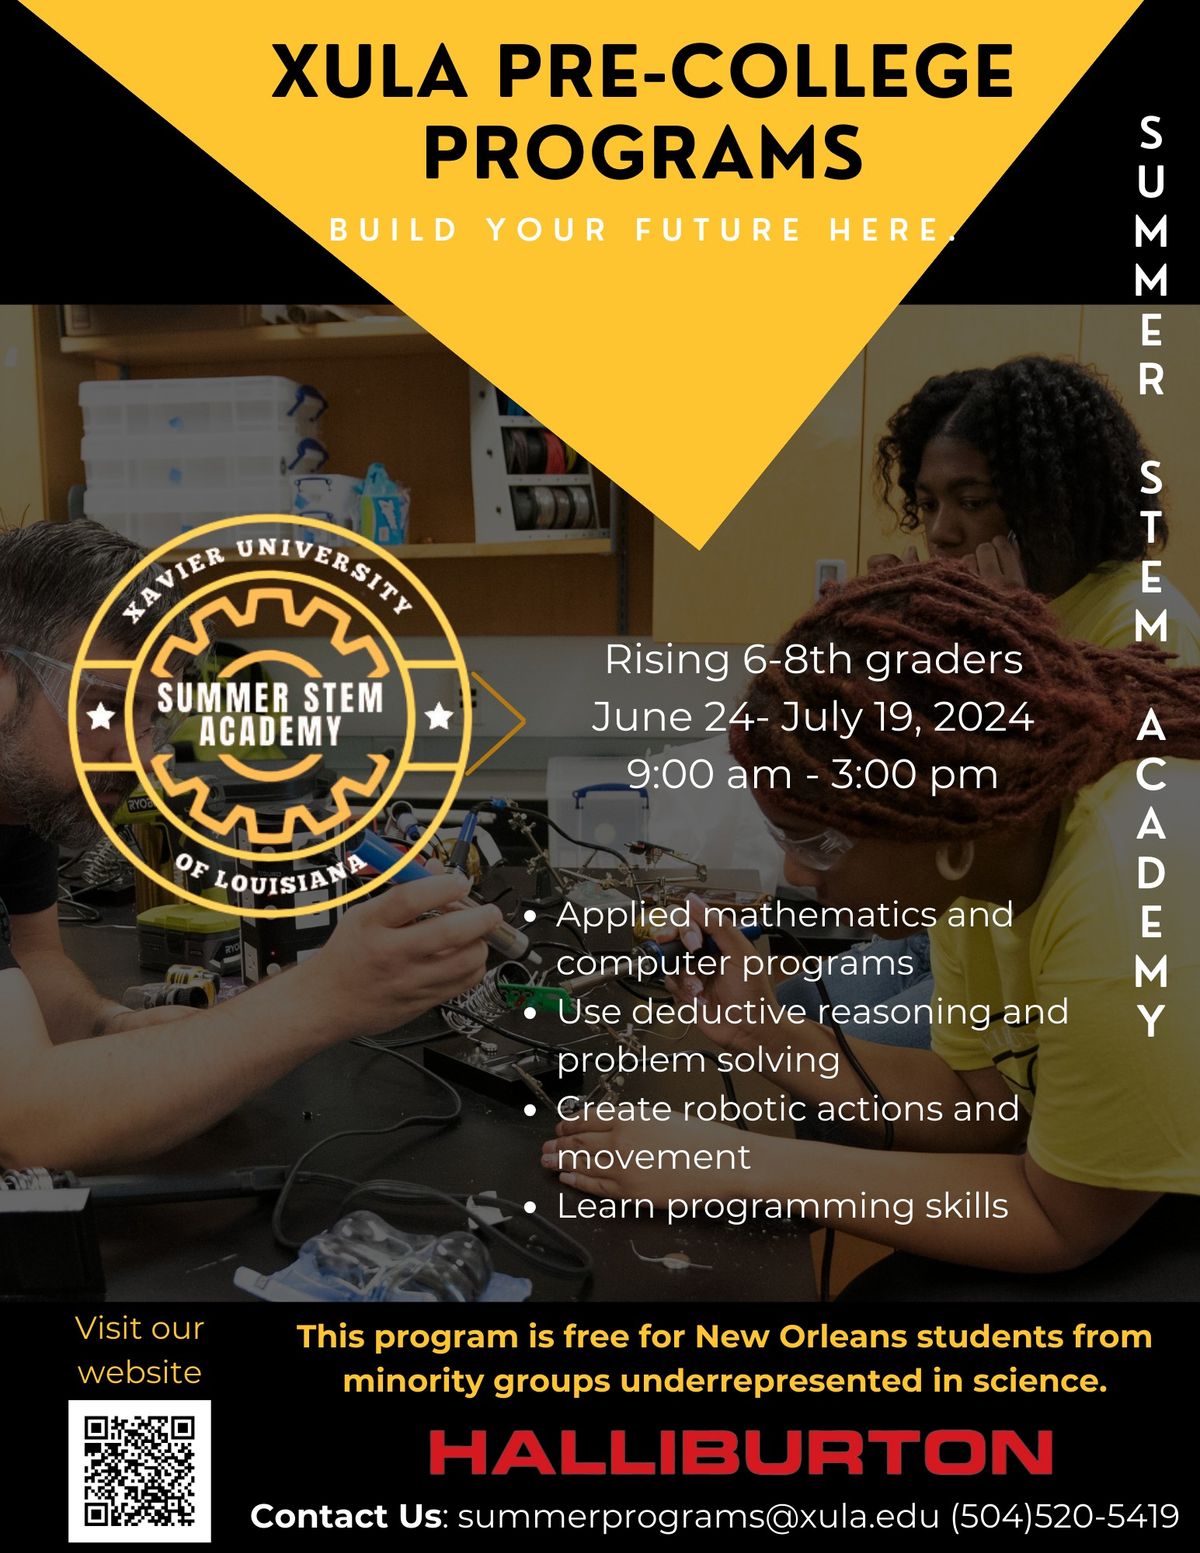 Summer STEM Academy (June 24-July 19) for Rising 6th to 8th Graders